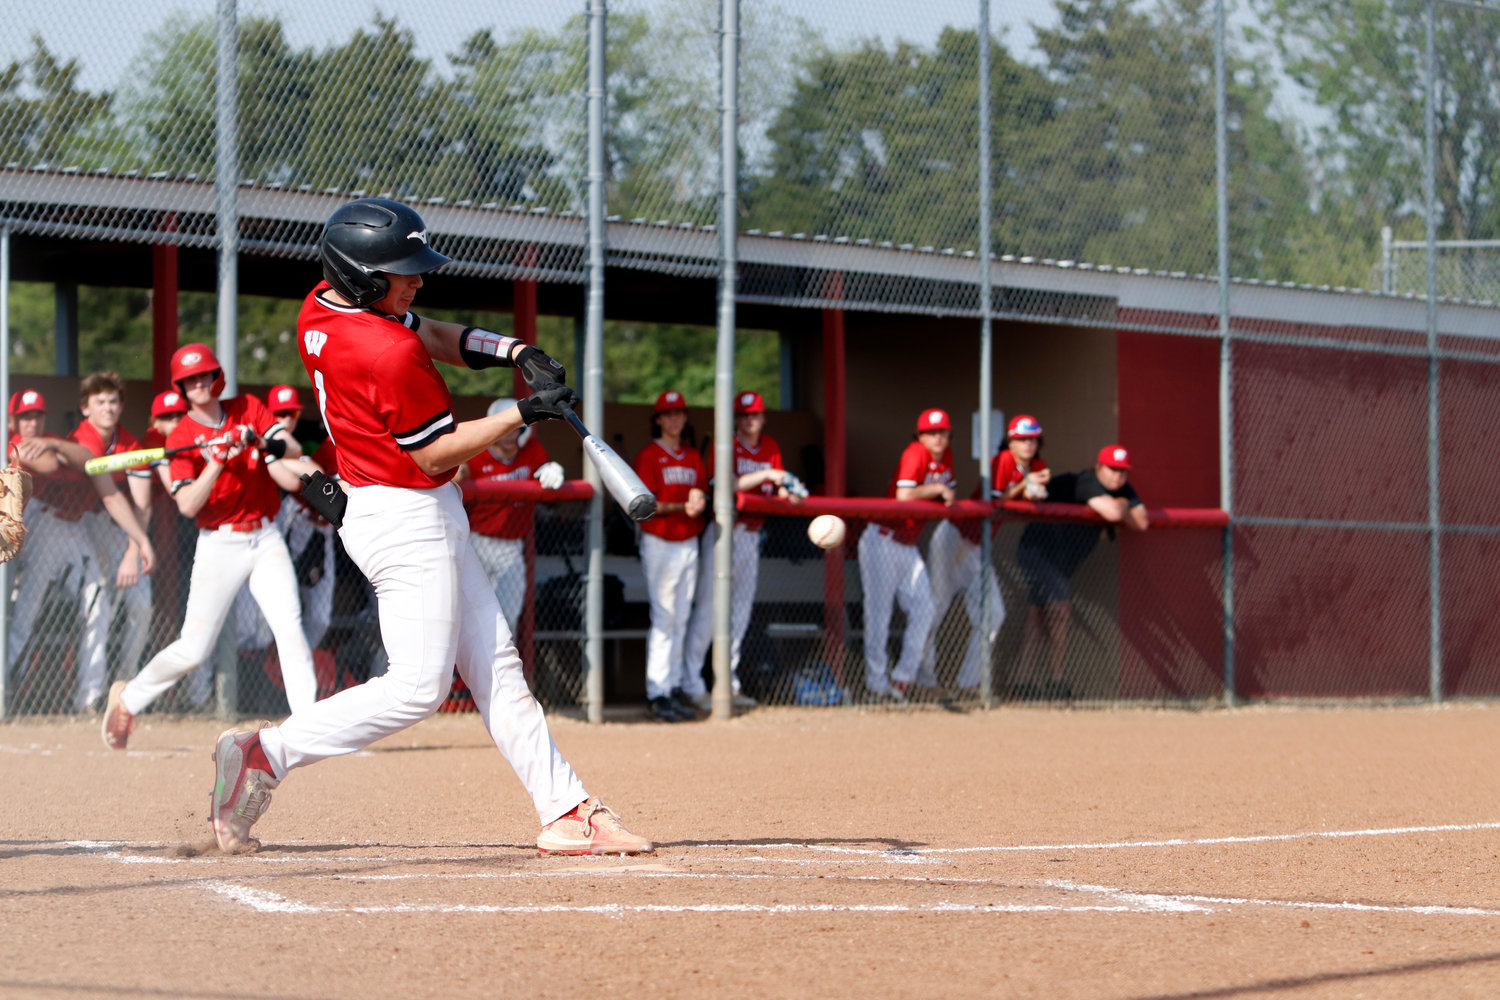 Austin Haas swings at a pitch during a regular season game against St. Charles West.